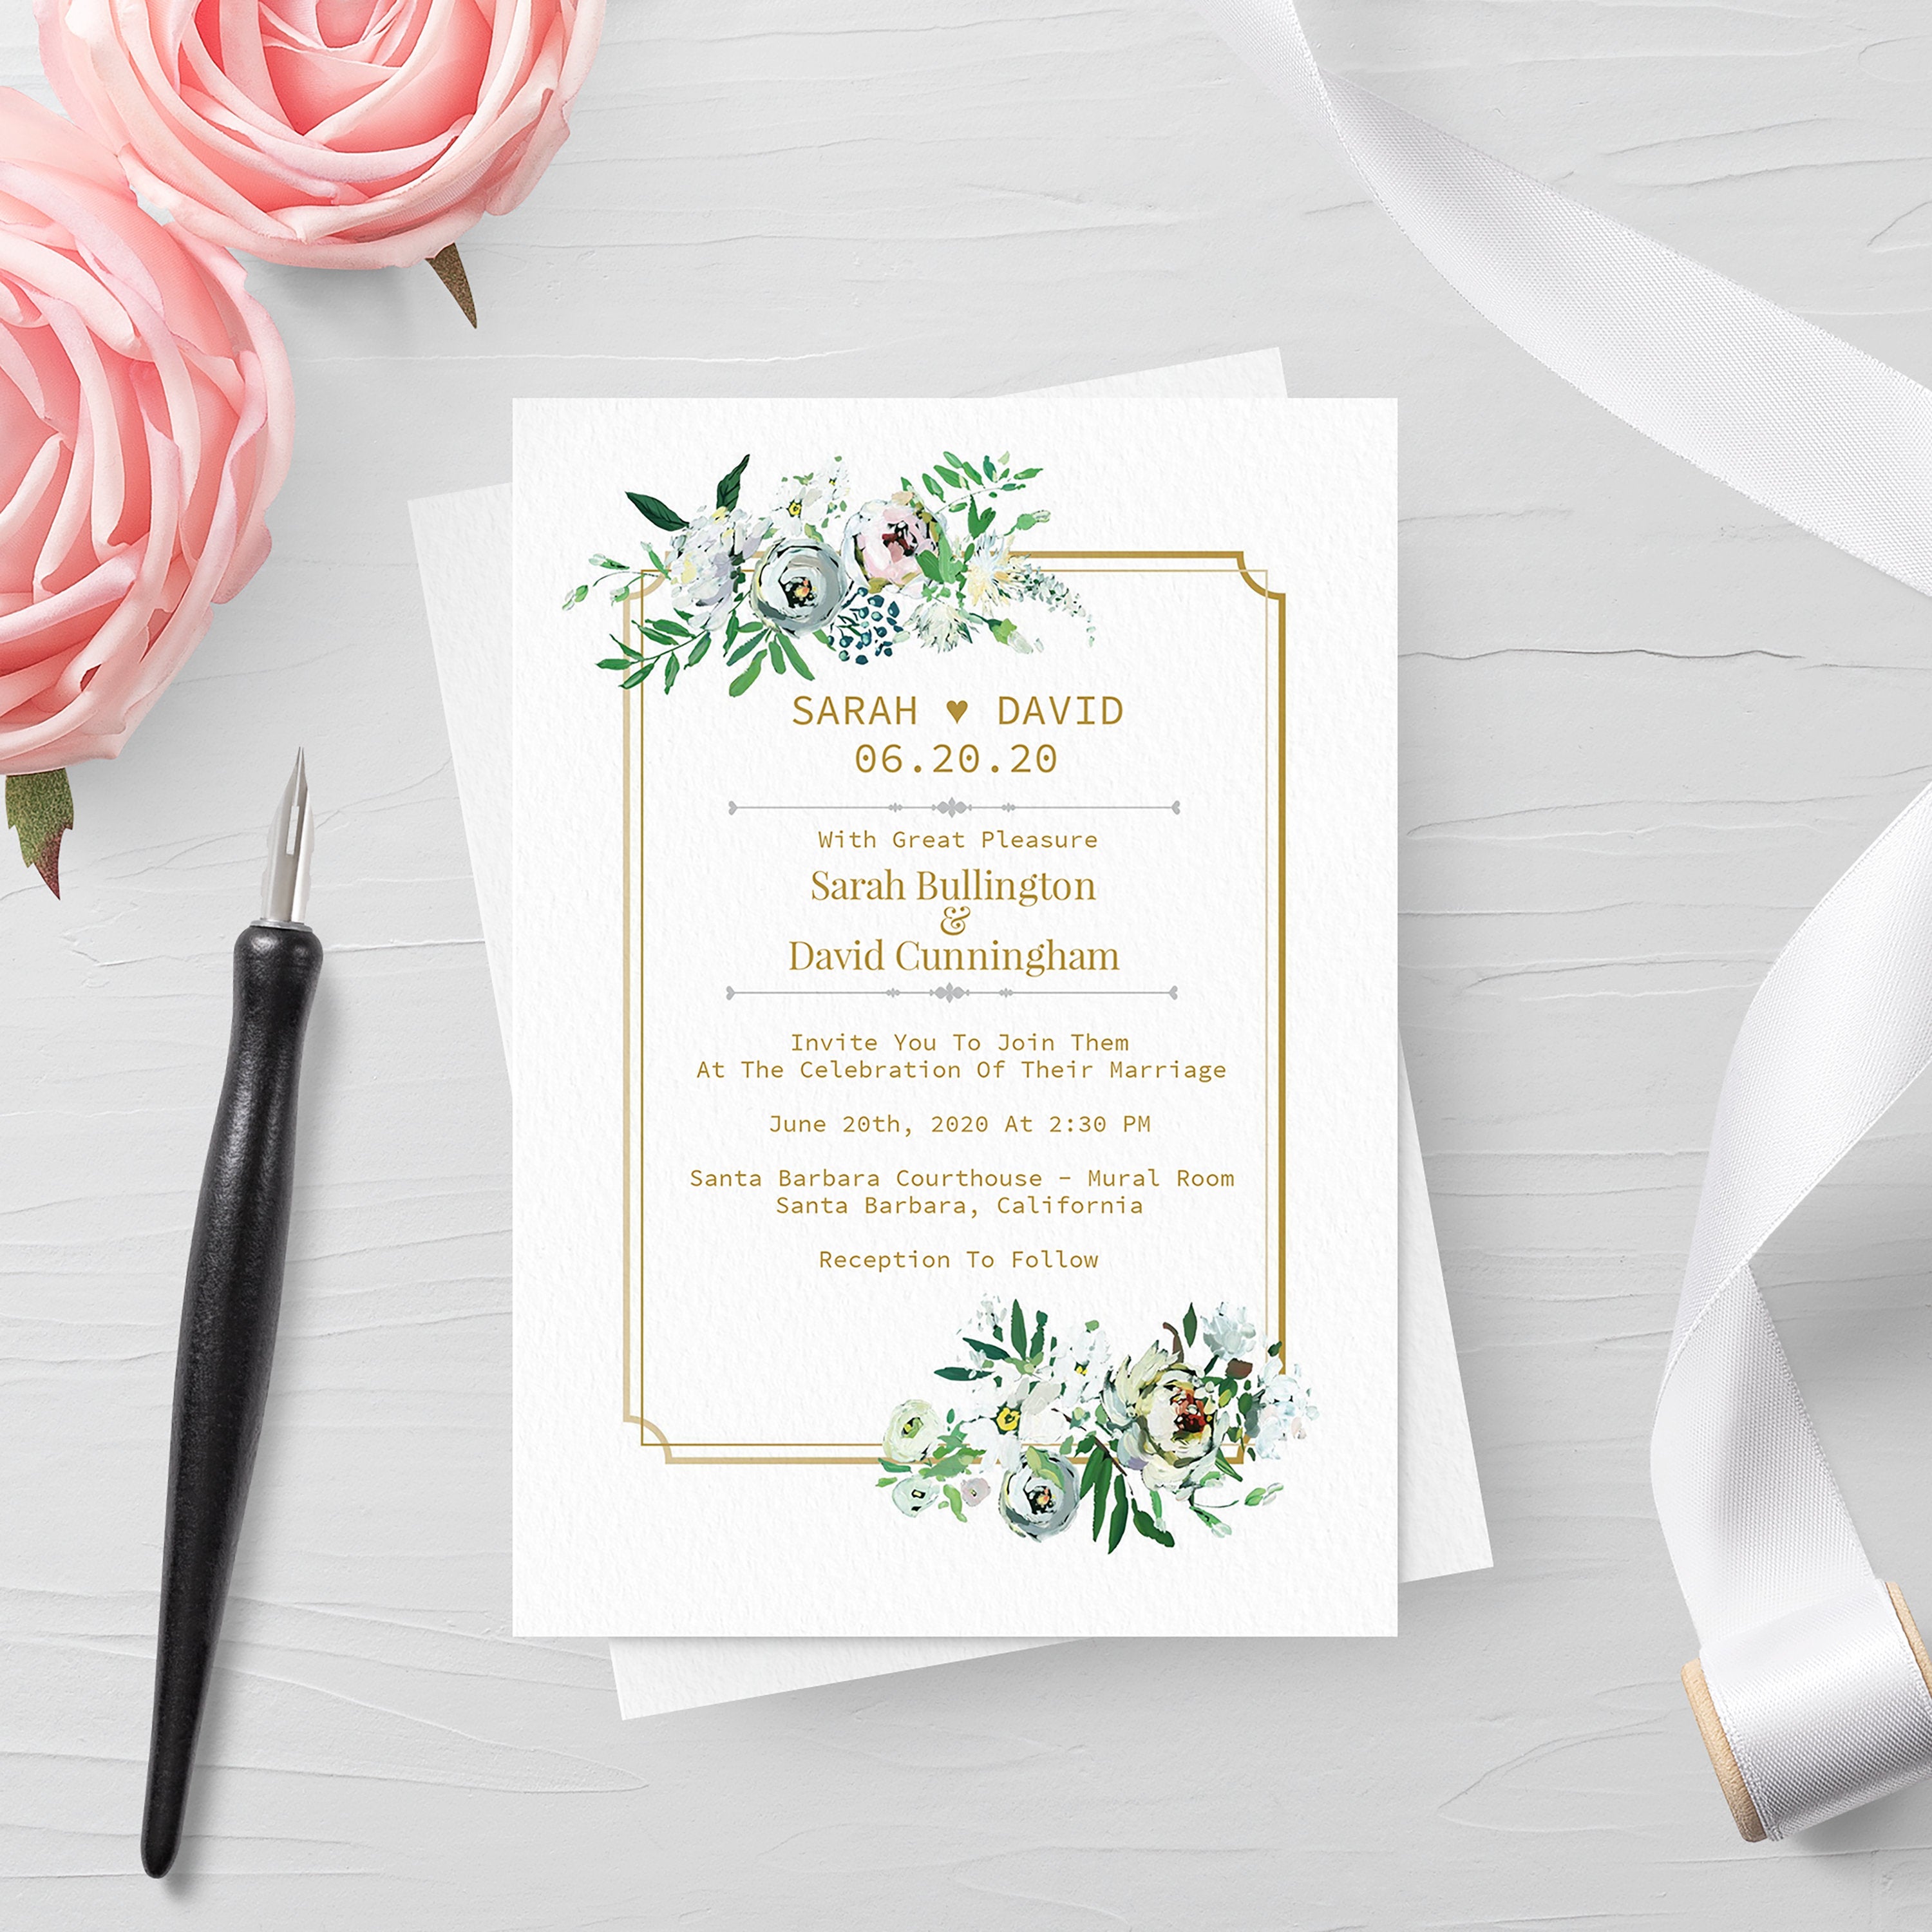 Blush and Gold Floral Wedding Invitation Template with Greenery, INSTANT DOWNLOAD, Editable Wedding Invitation Suite Printable Set - BGF100 - @PlumPolkaDot 